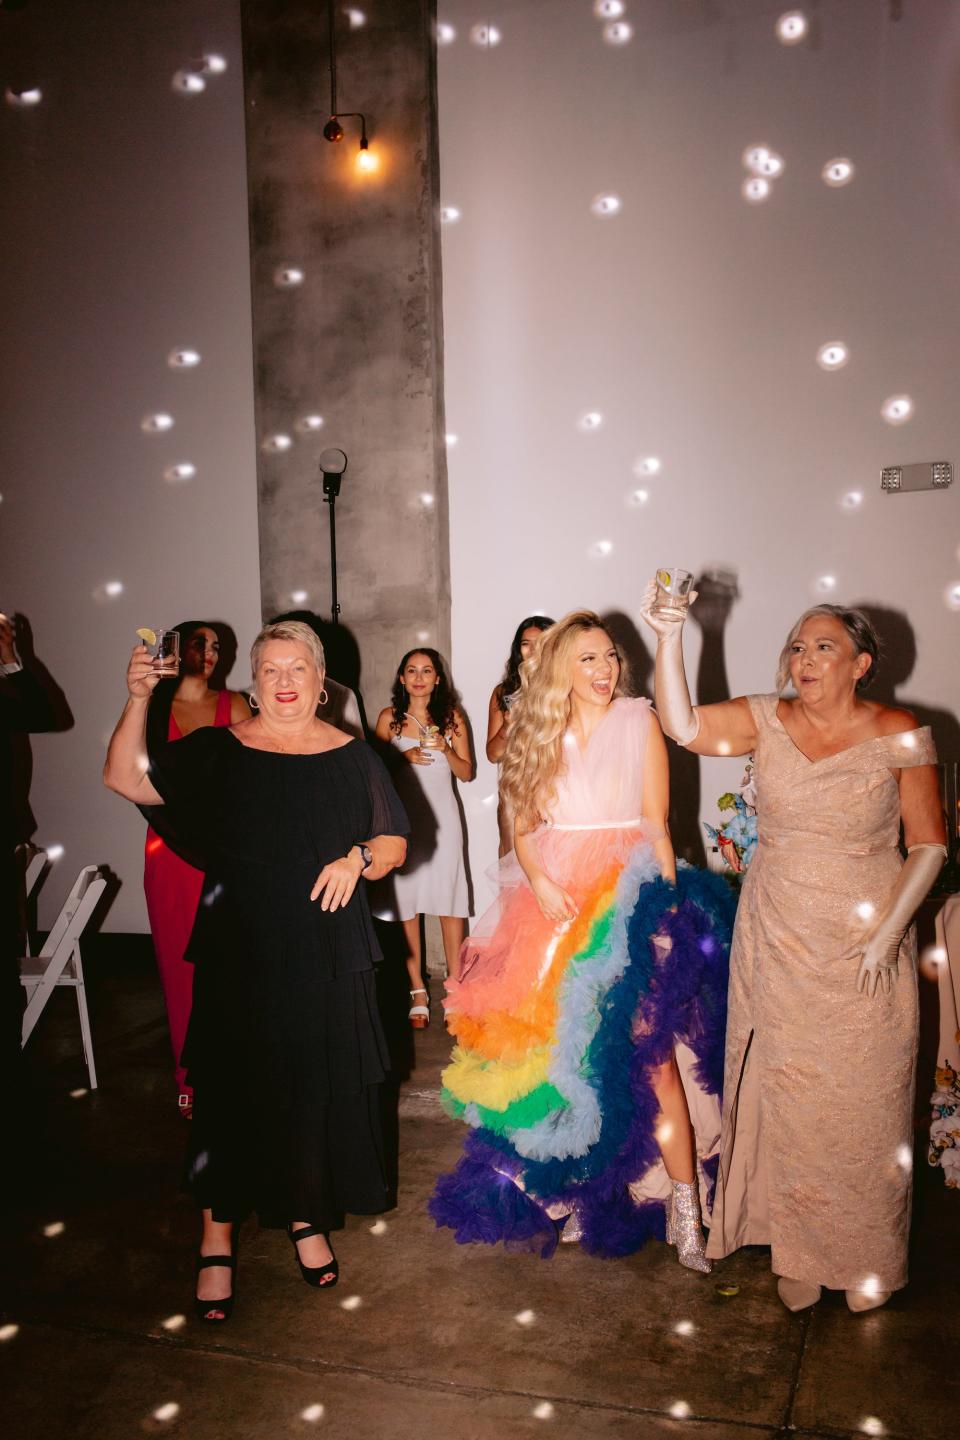 A bride in a rainbow, tulle dress stands with her wedding guests.